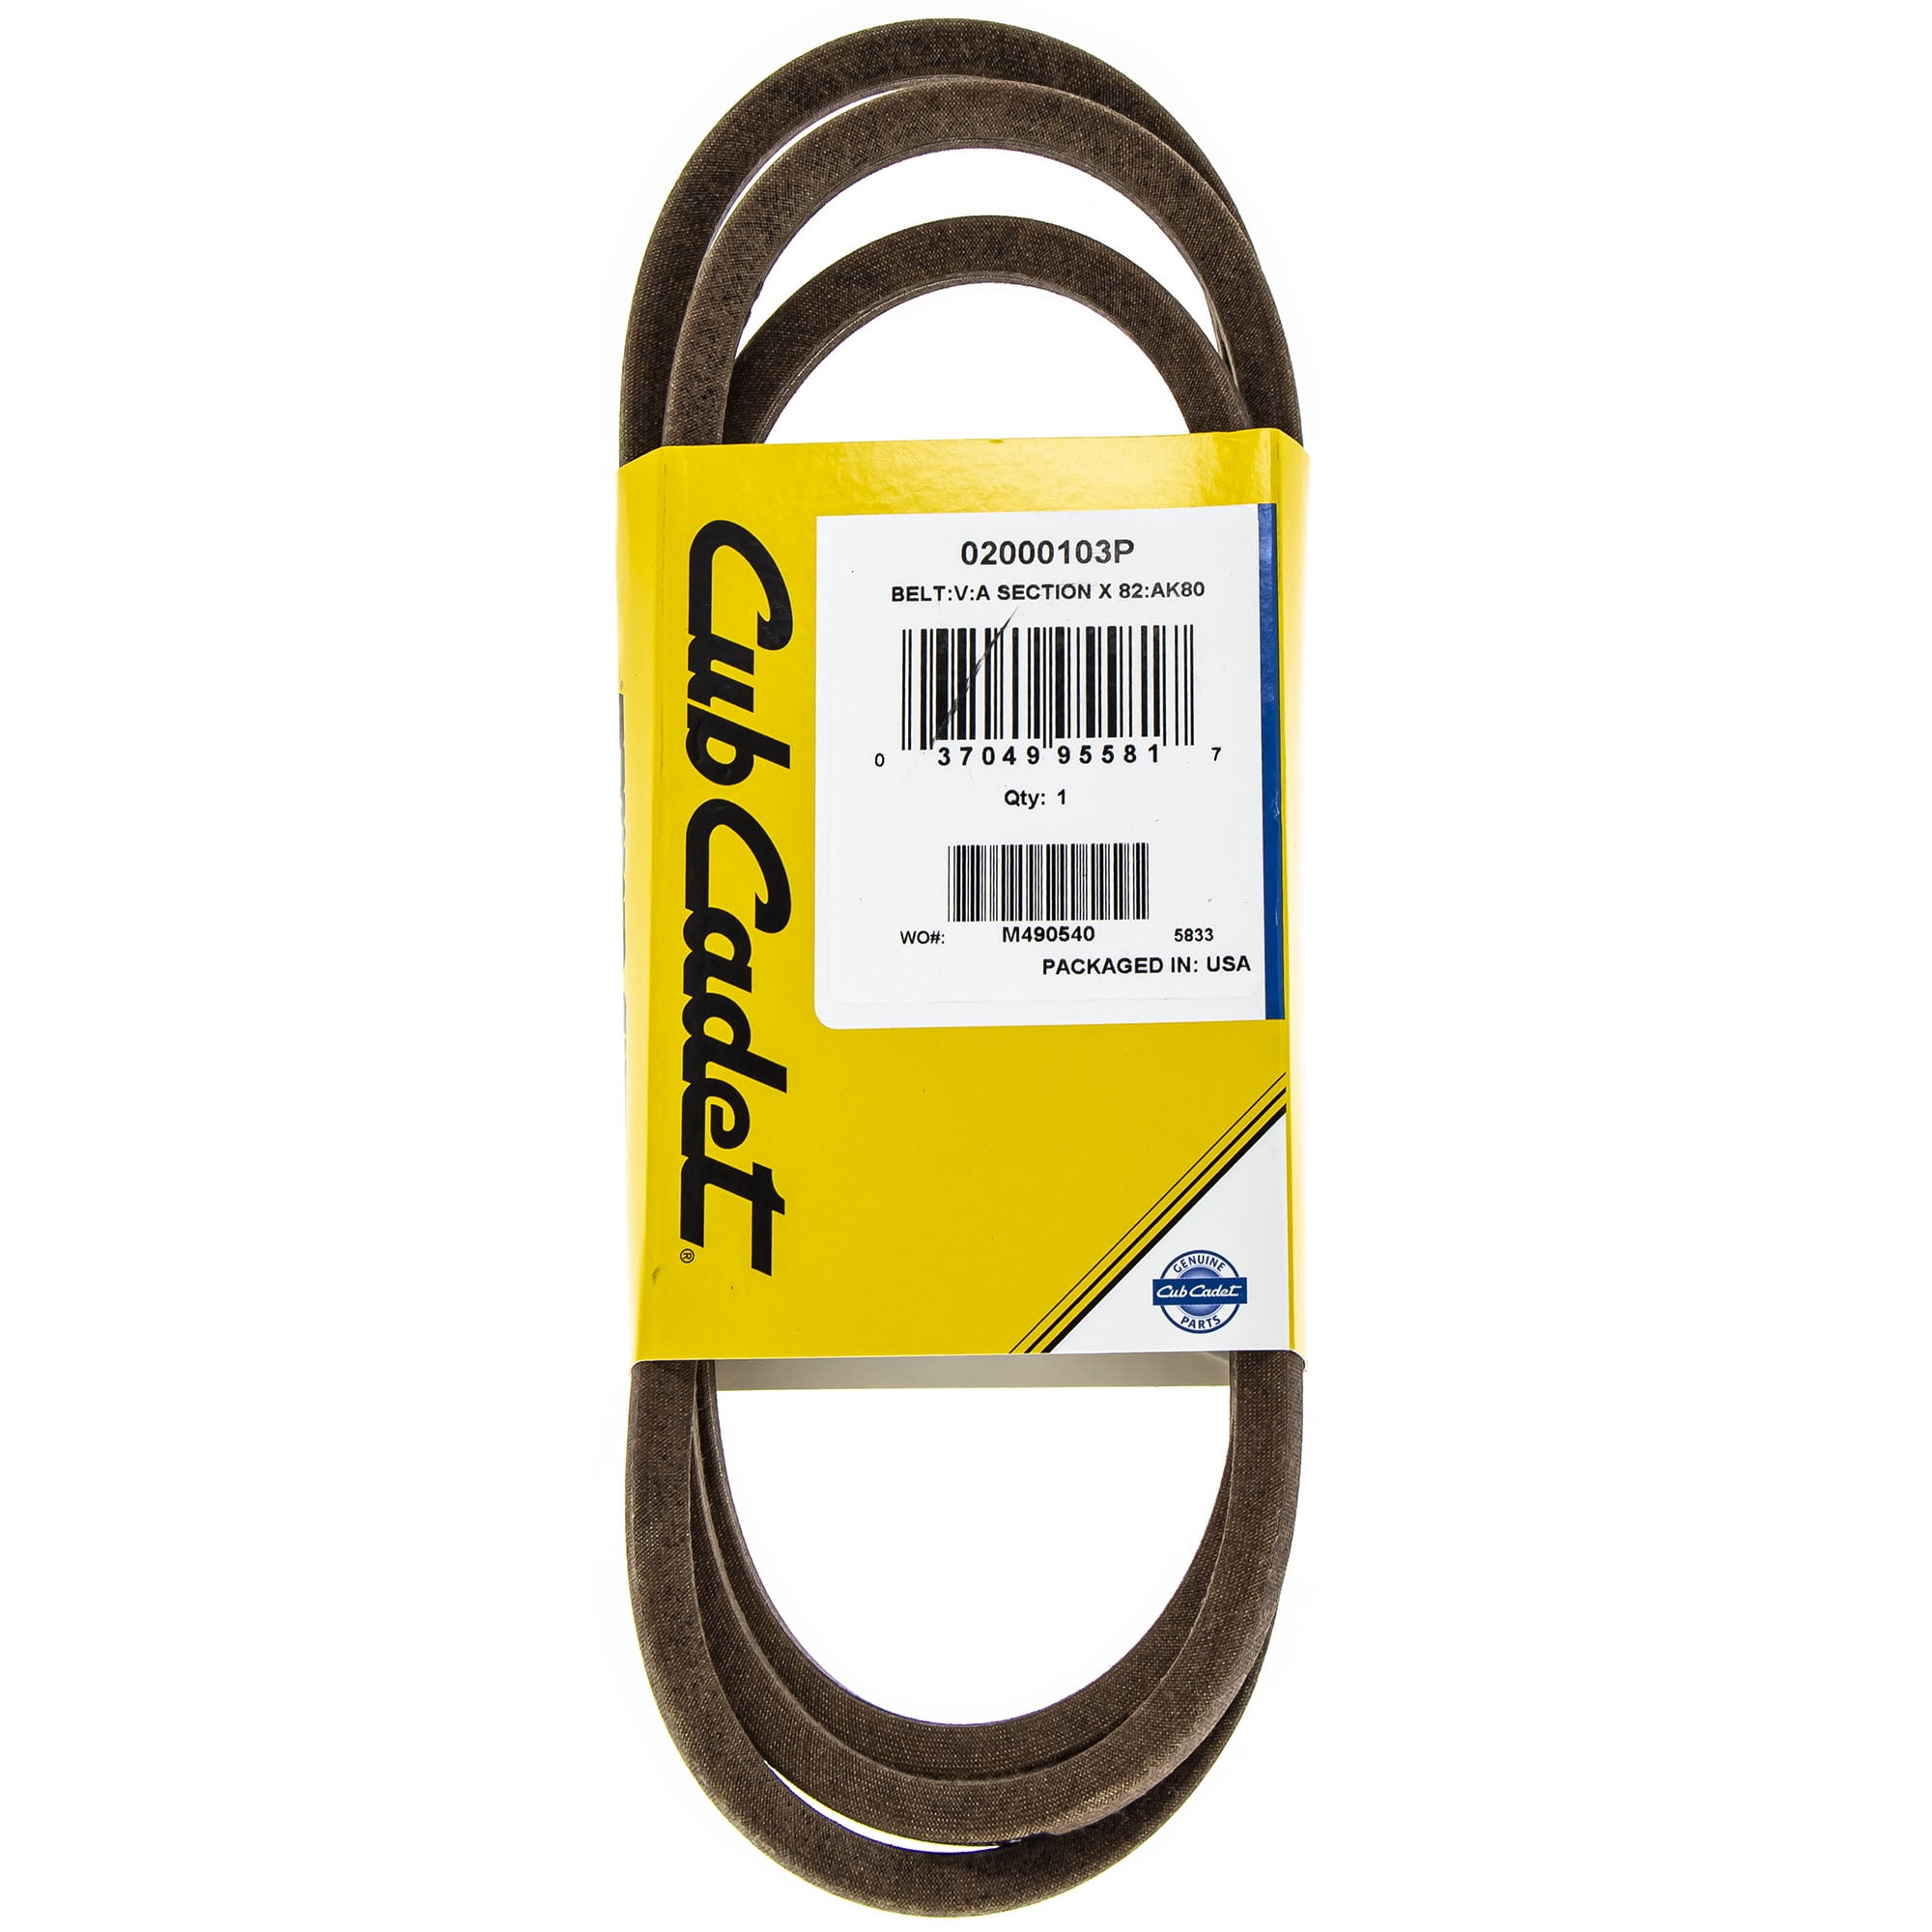 Cub Cadet 946-05209B RWD Speed Control Cable SC300IP Self-Propelled Lawn Mower